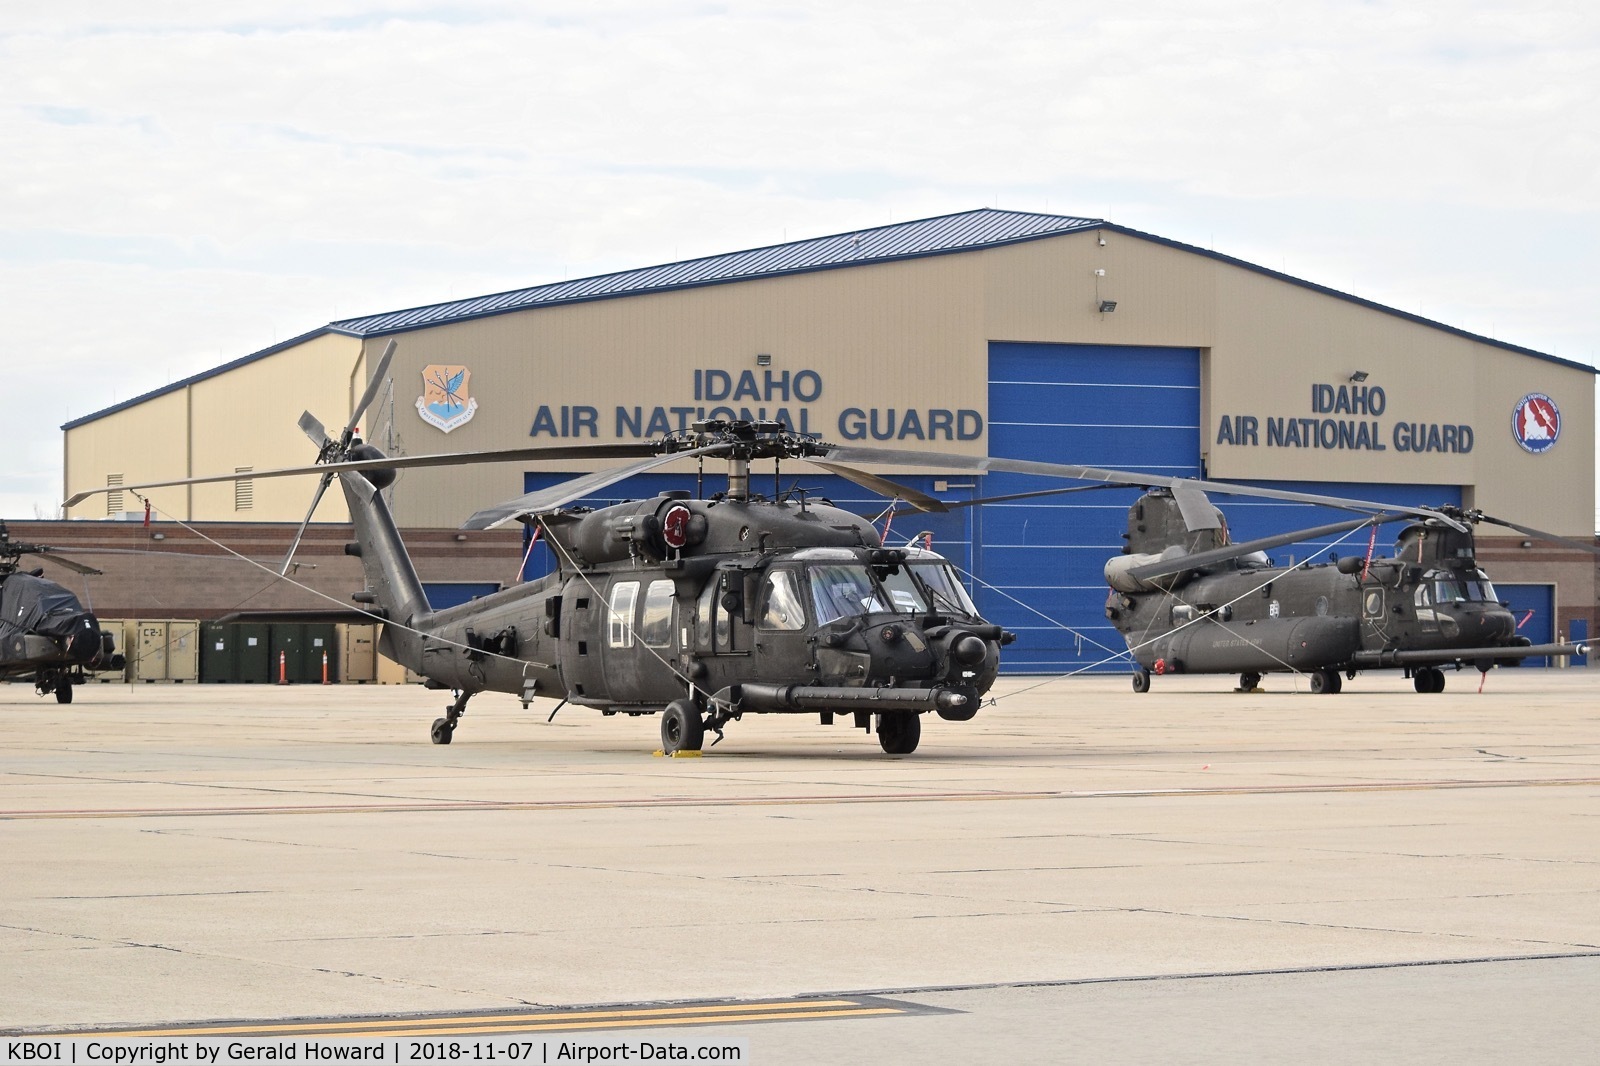 Boise Air Terminal/gowen Fld Airport (BOI) - A CH-60 & MC-47G from the U.S. Army 160th Special Operations Aviation Regiment (SOAR)
“Night Stalkers” 4th BN, Joint Base Lewis-McChord, WA, parked on the Idaho ANG ramp.
